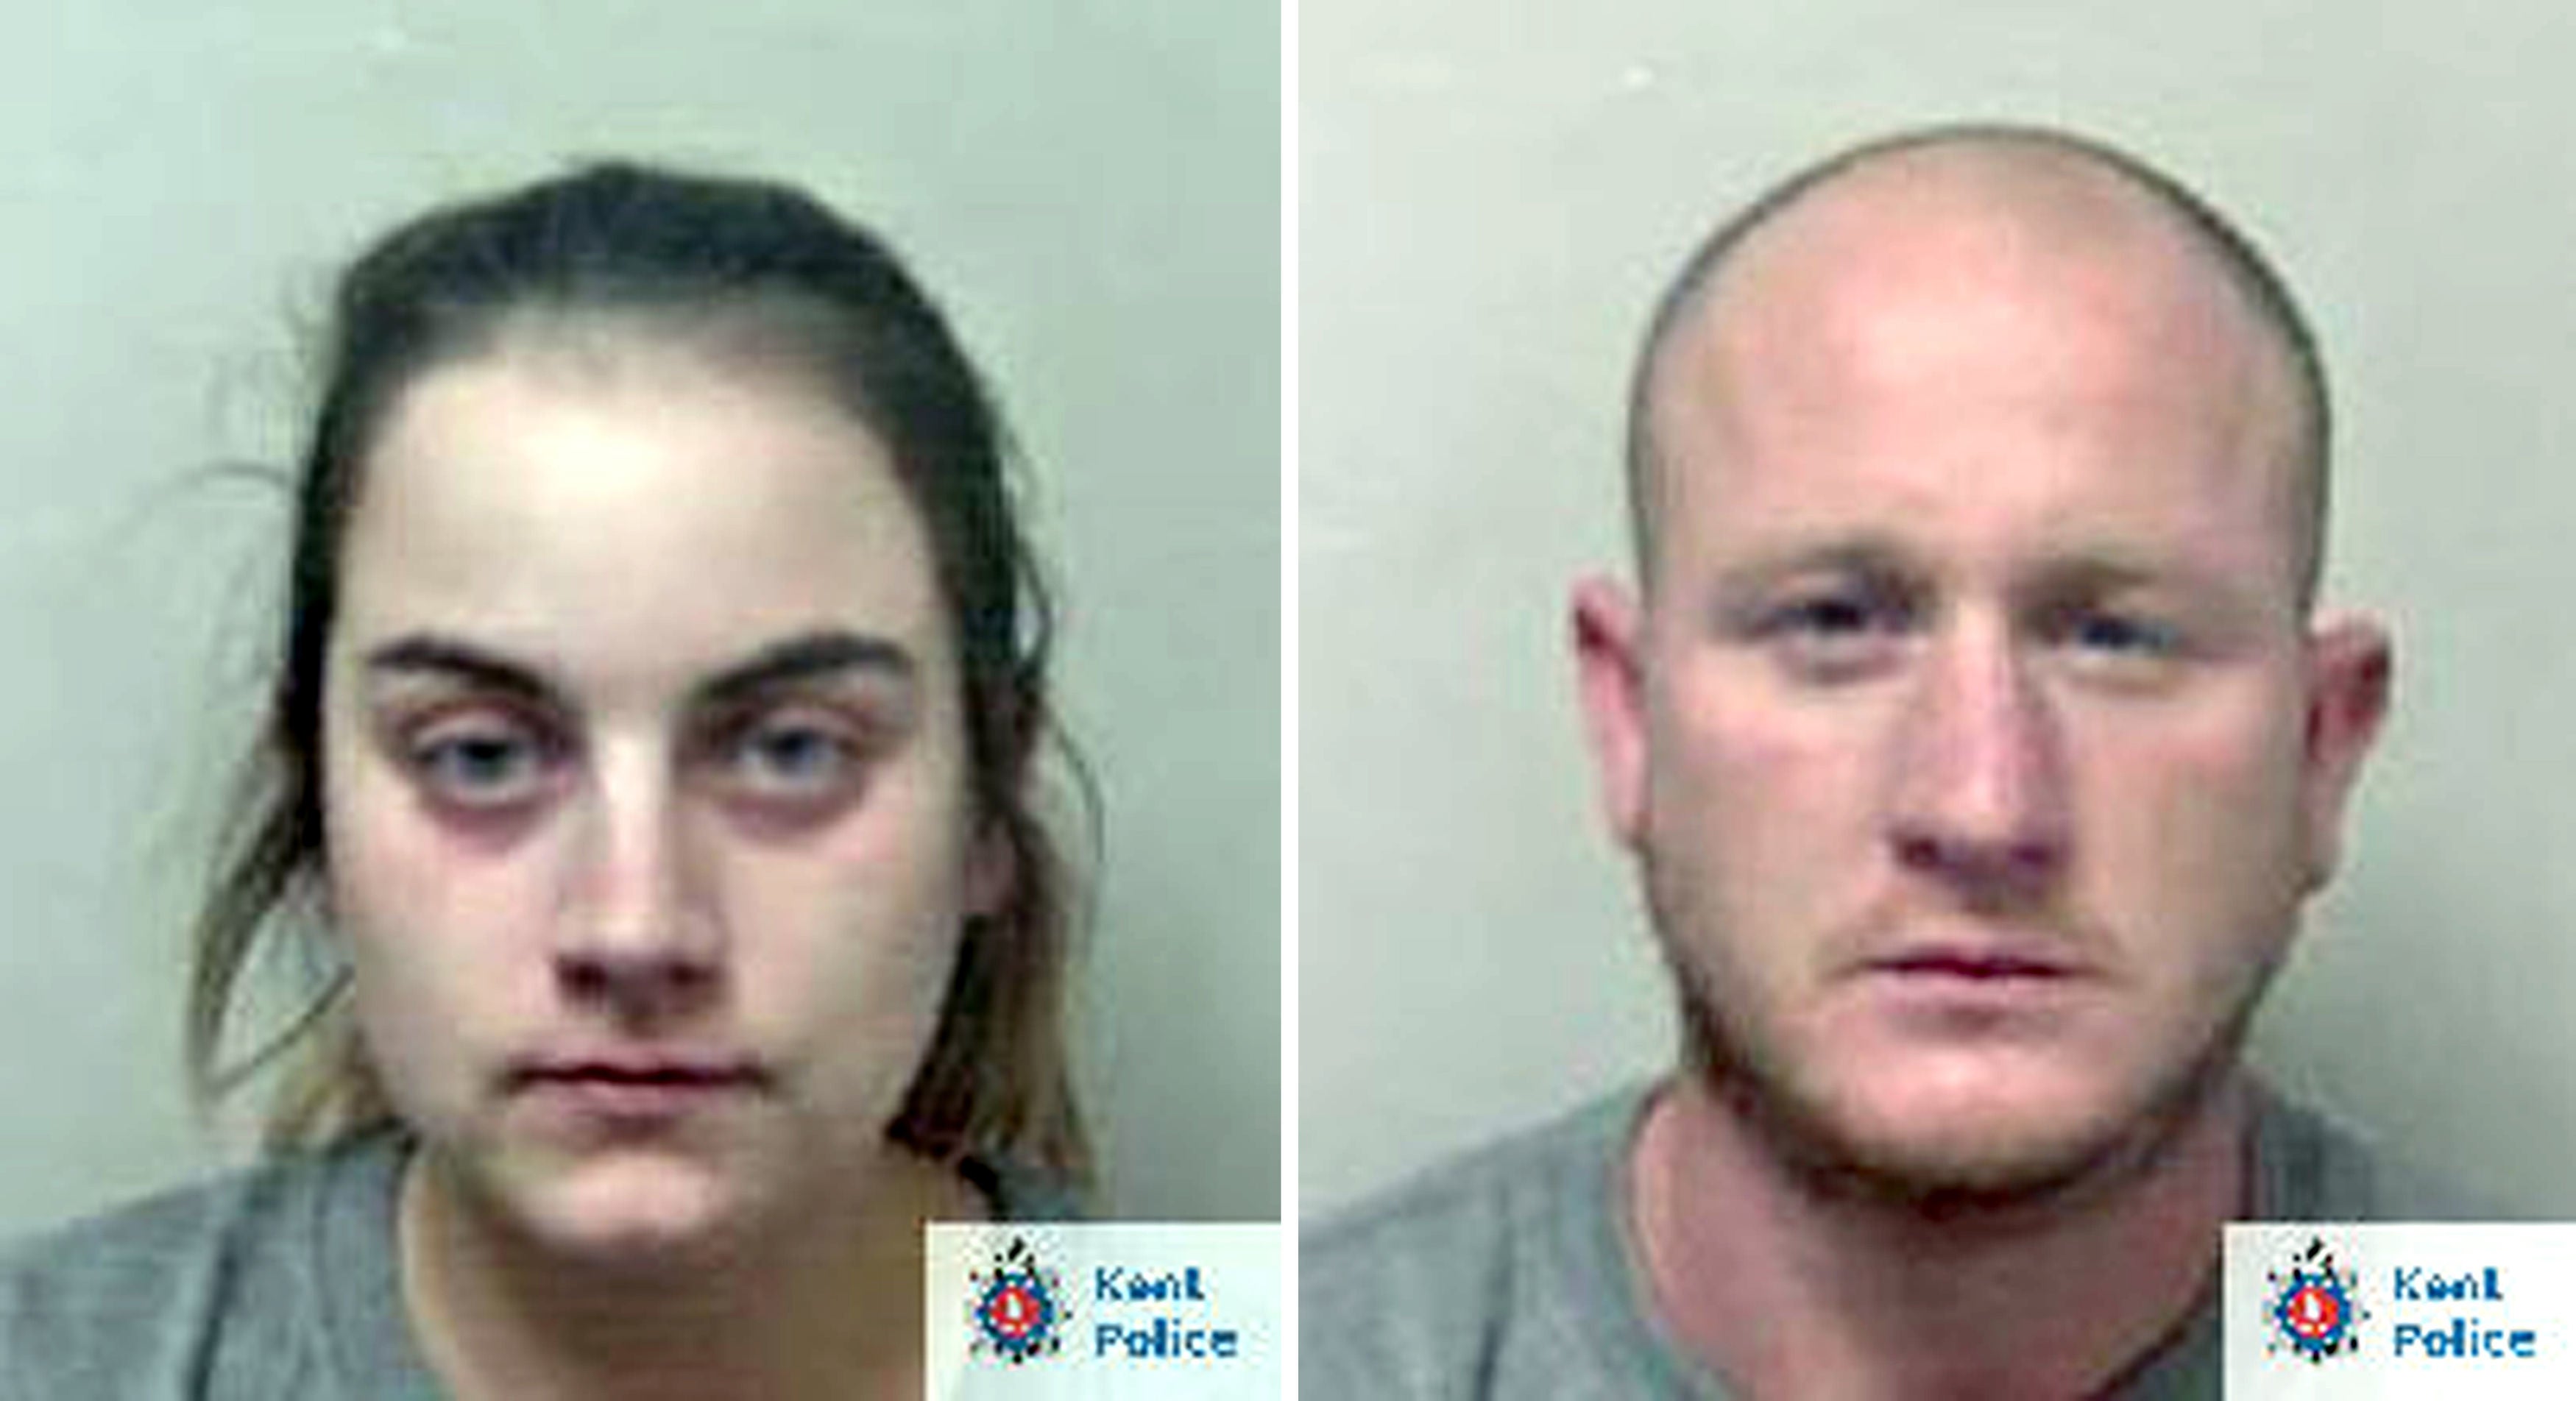 Sian Hedges, 27, and Jack Benham, 35, were sentenced to life imprisonment for the murder of toddler Alfie